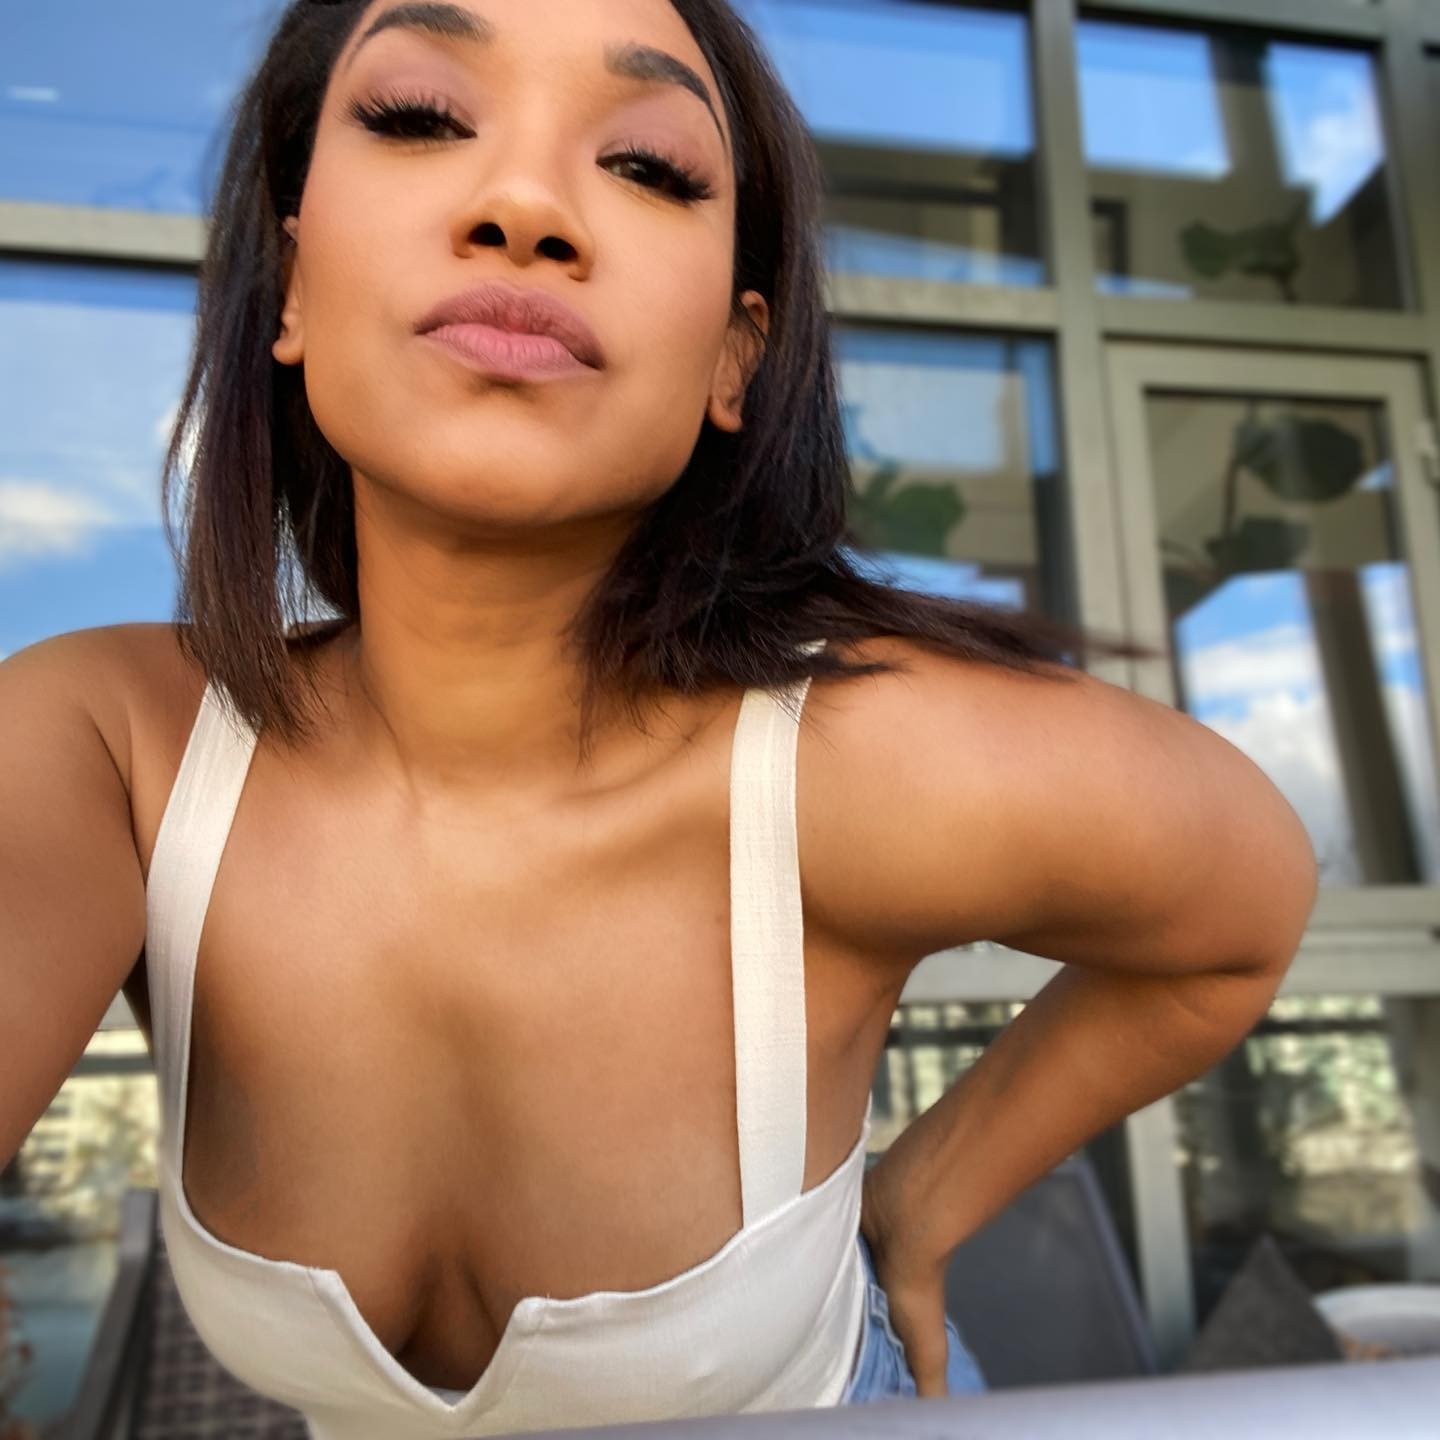 Candice Patton Tits TheFappening.Pro 5 - Candice Patton Nude Iris West-Allen From “Flash” And “Legends of Tomorrow” (74 Photos)